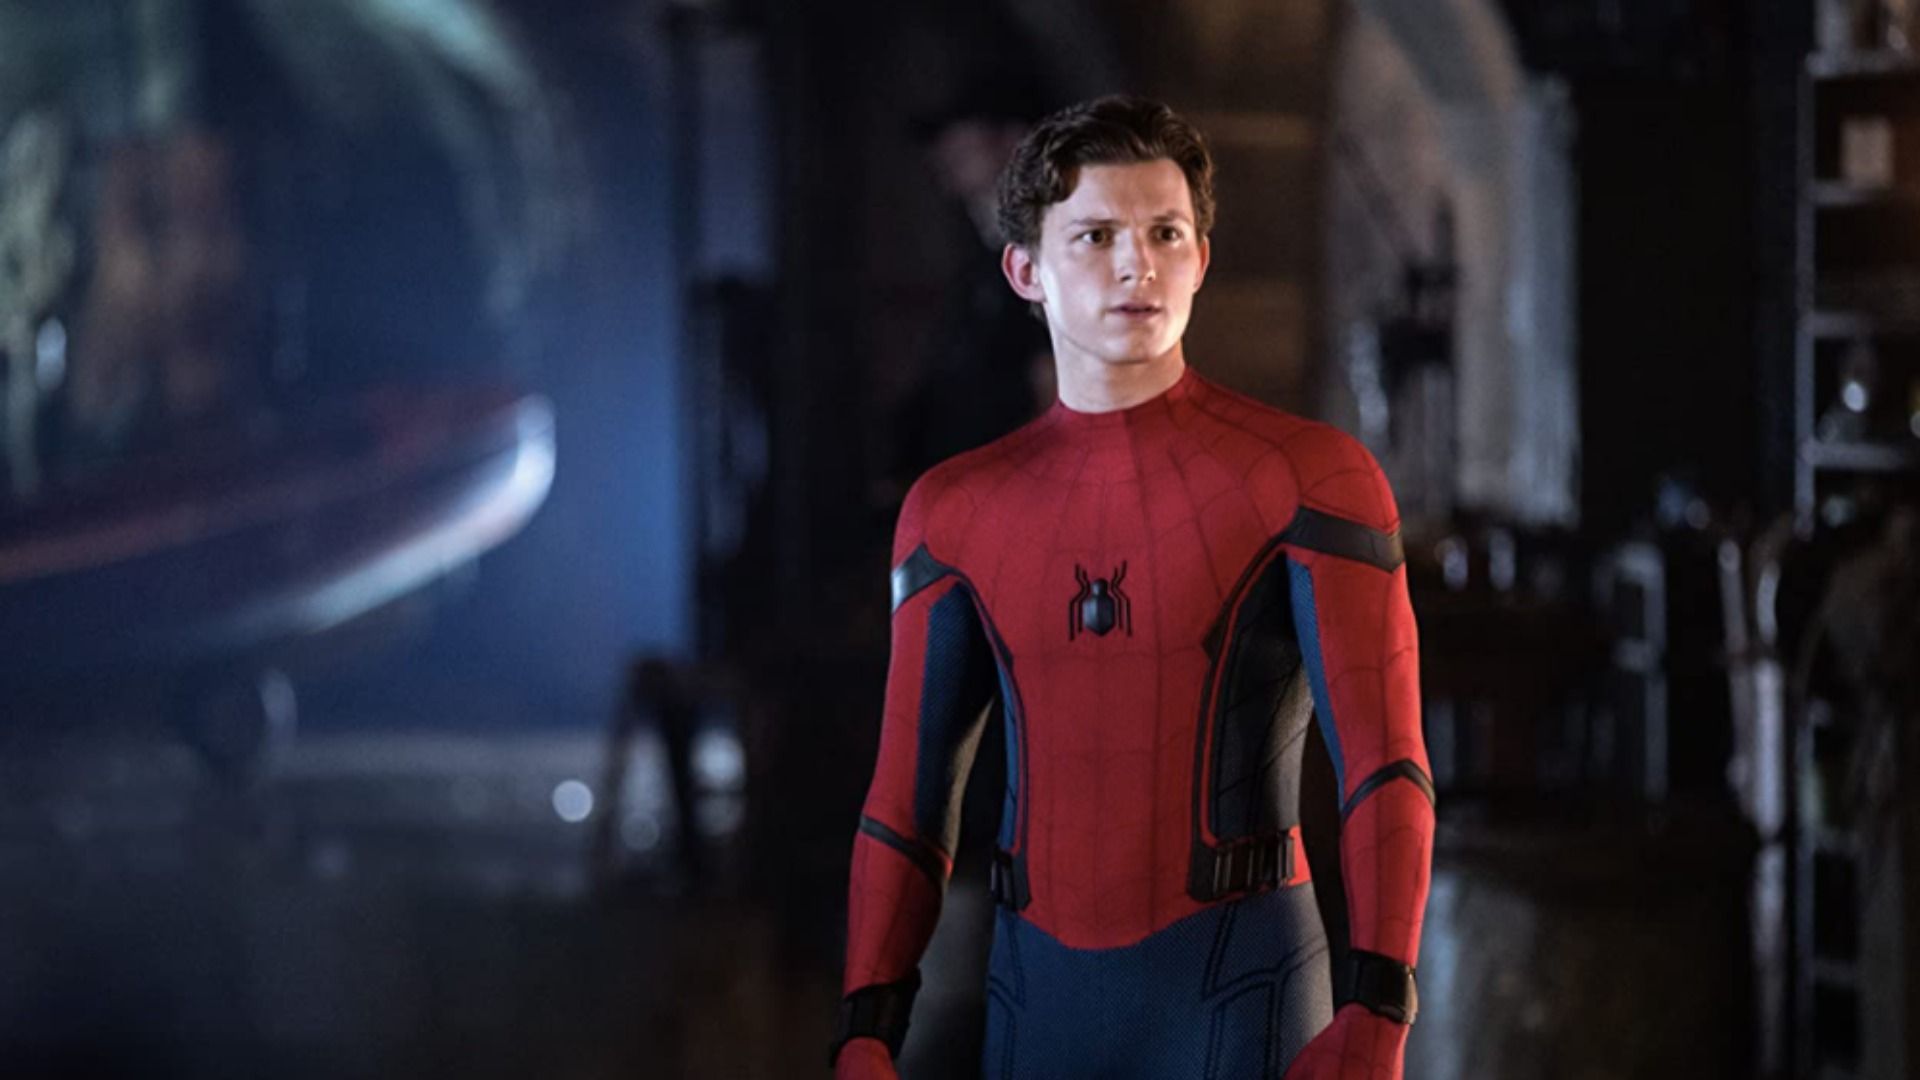 Spider Man 3 Set Footage Sees Spidey And MJ Together, And Could Link To Far From Home